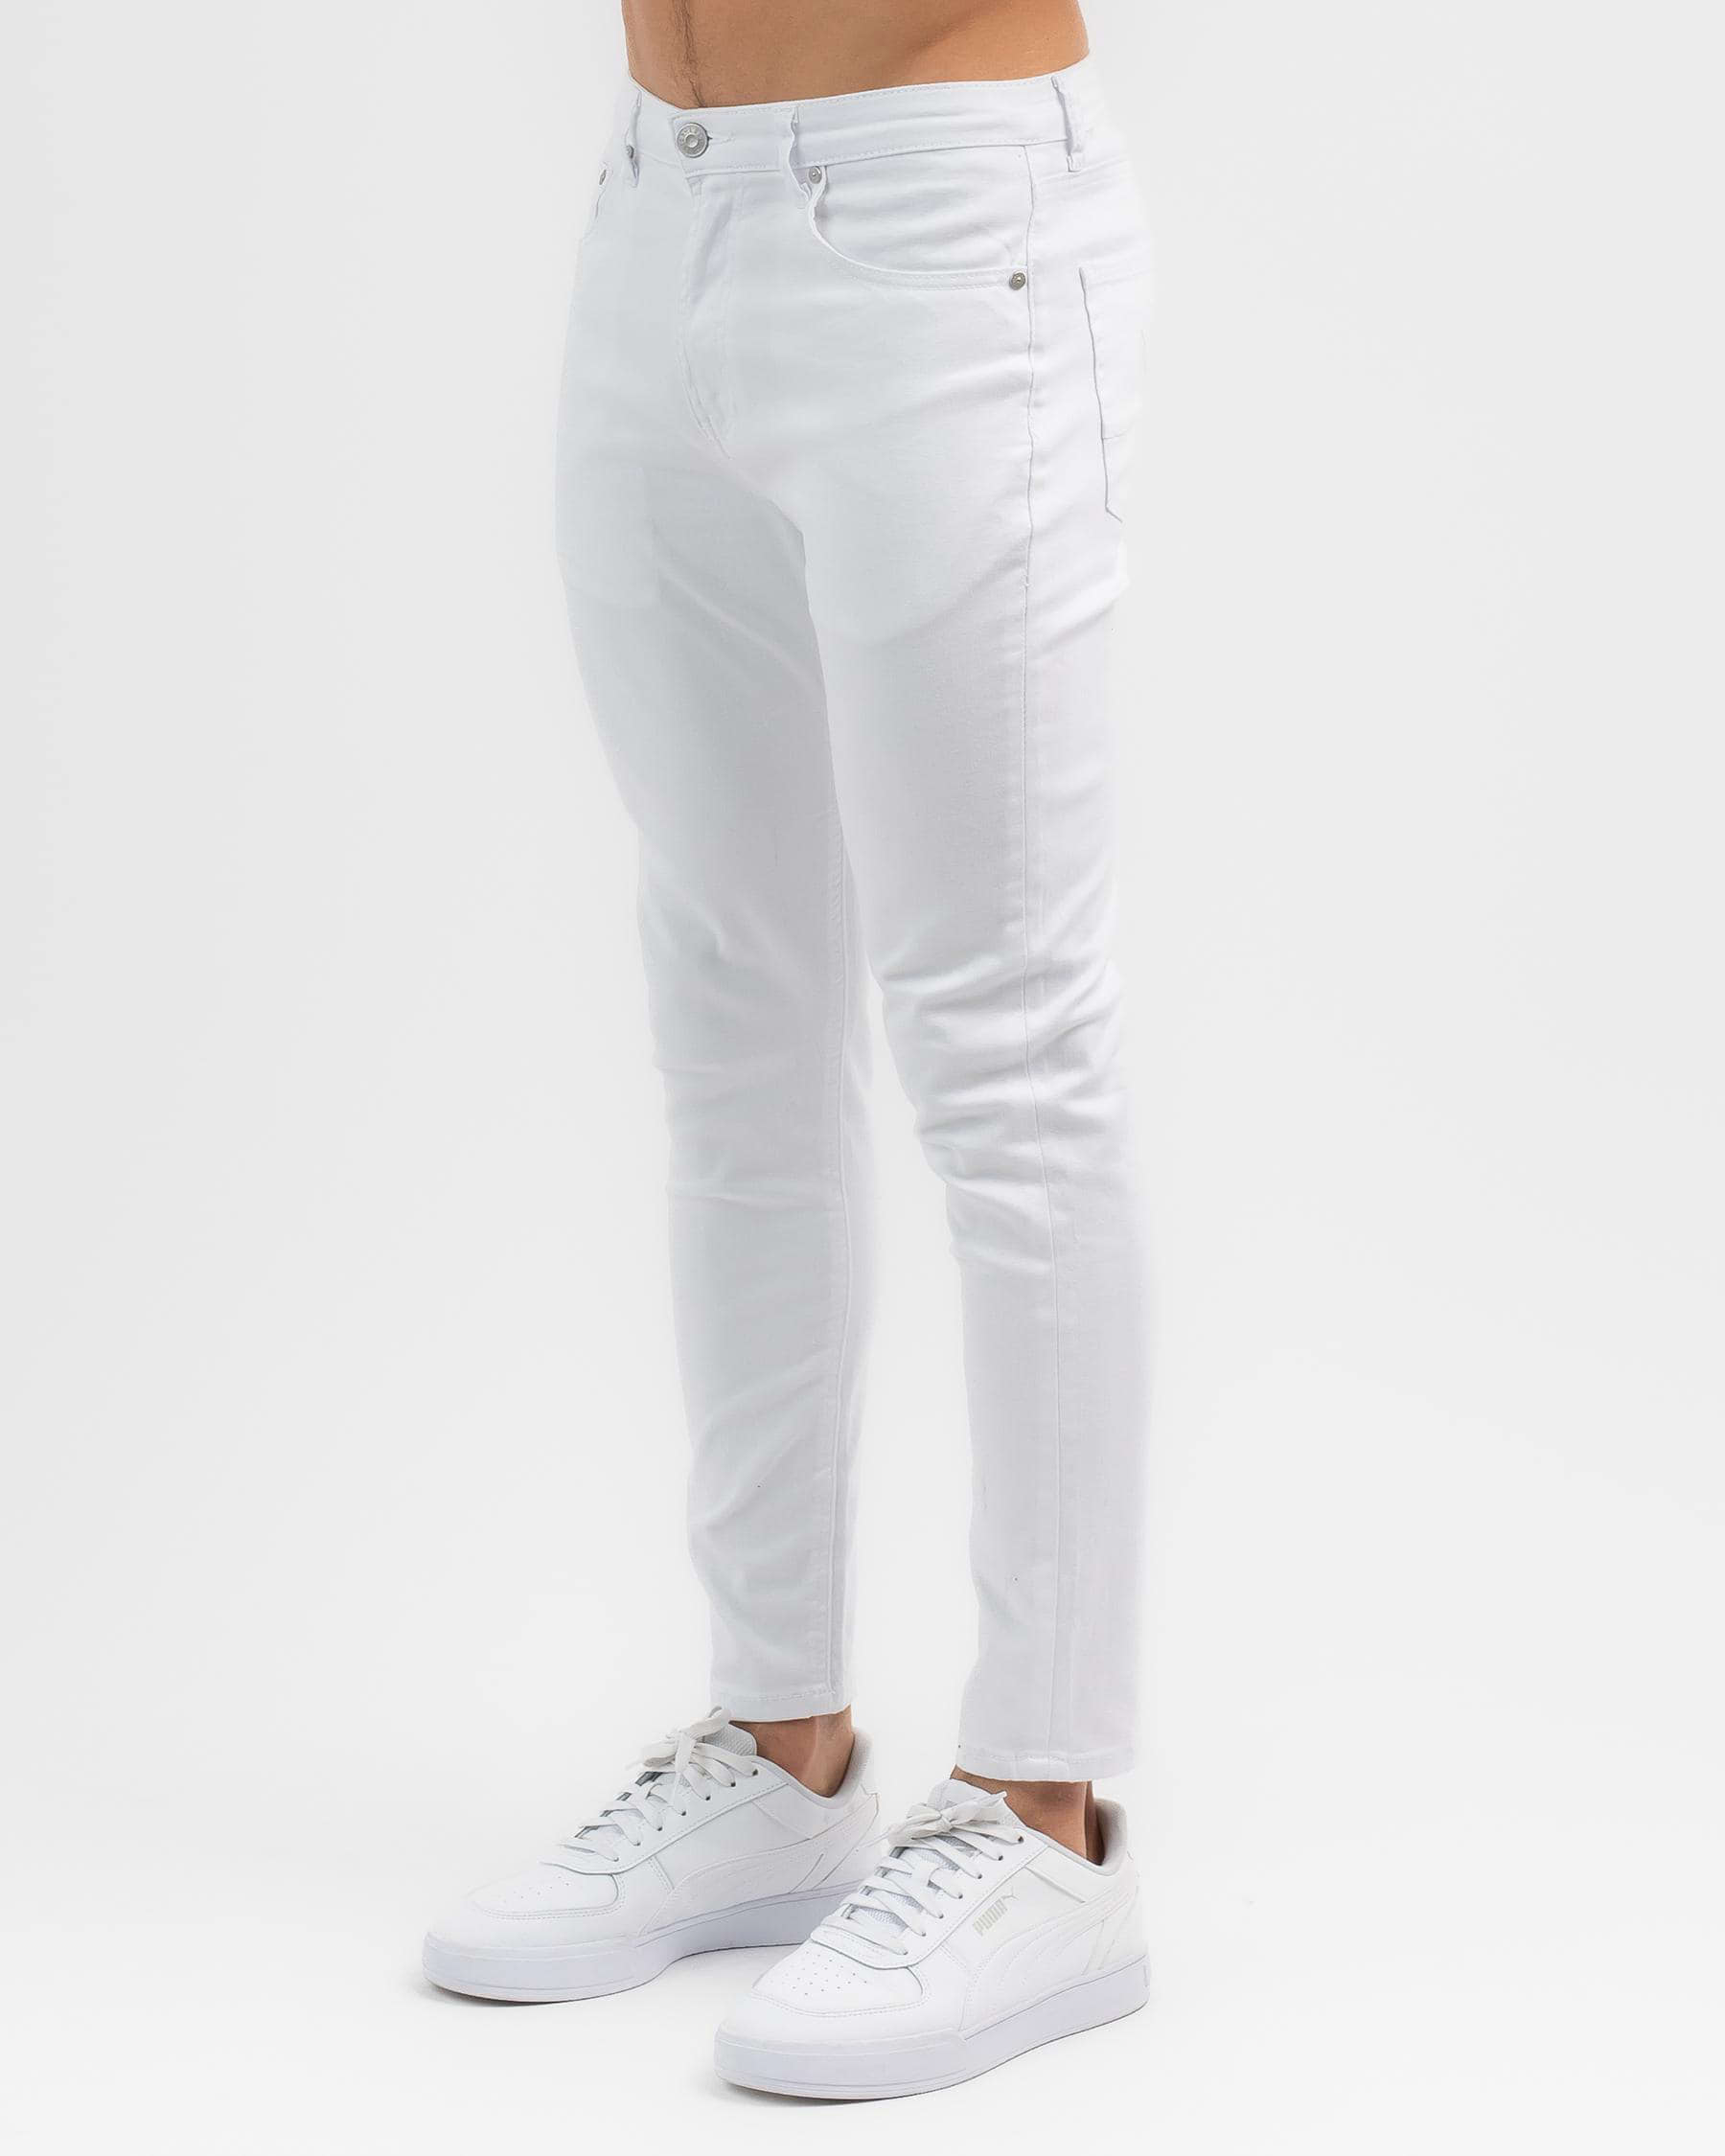 Shop Lucid Chillin Jeans In White - Fast Shipping & Easy Returns - City ...